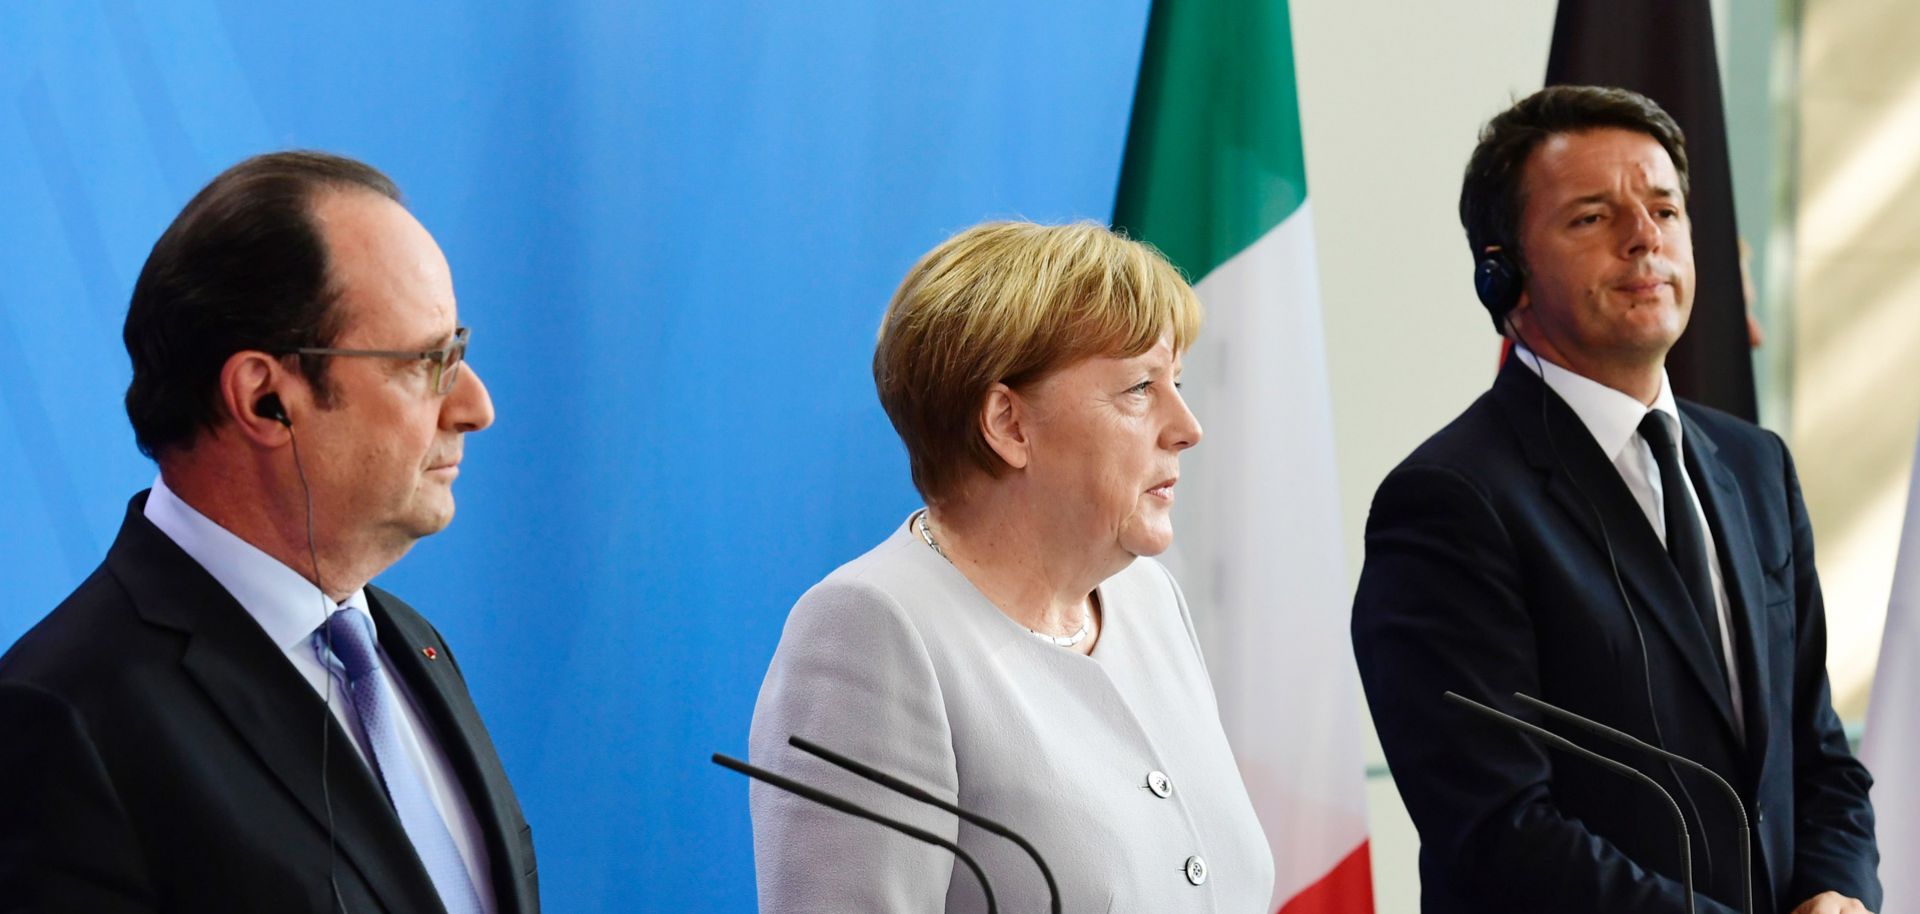 French President Francois Hollande (L), German Chancellor Angela Merkel (C) and Italian Prime Minister Matteo Renzi met June 27 to discuss the United Kingdom's referendum vote to leave the European Union. Buyer's remorse was the refrain in the wake of the June 23 Brexit vote.